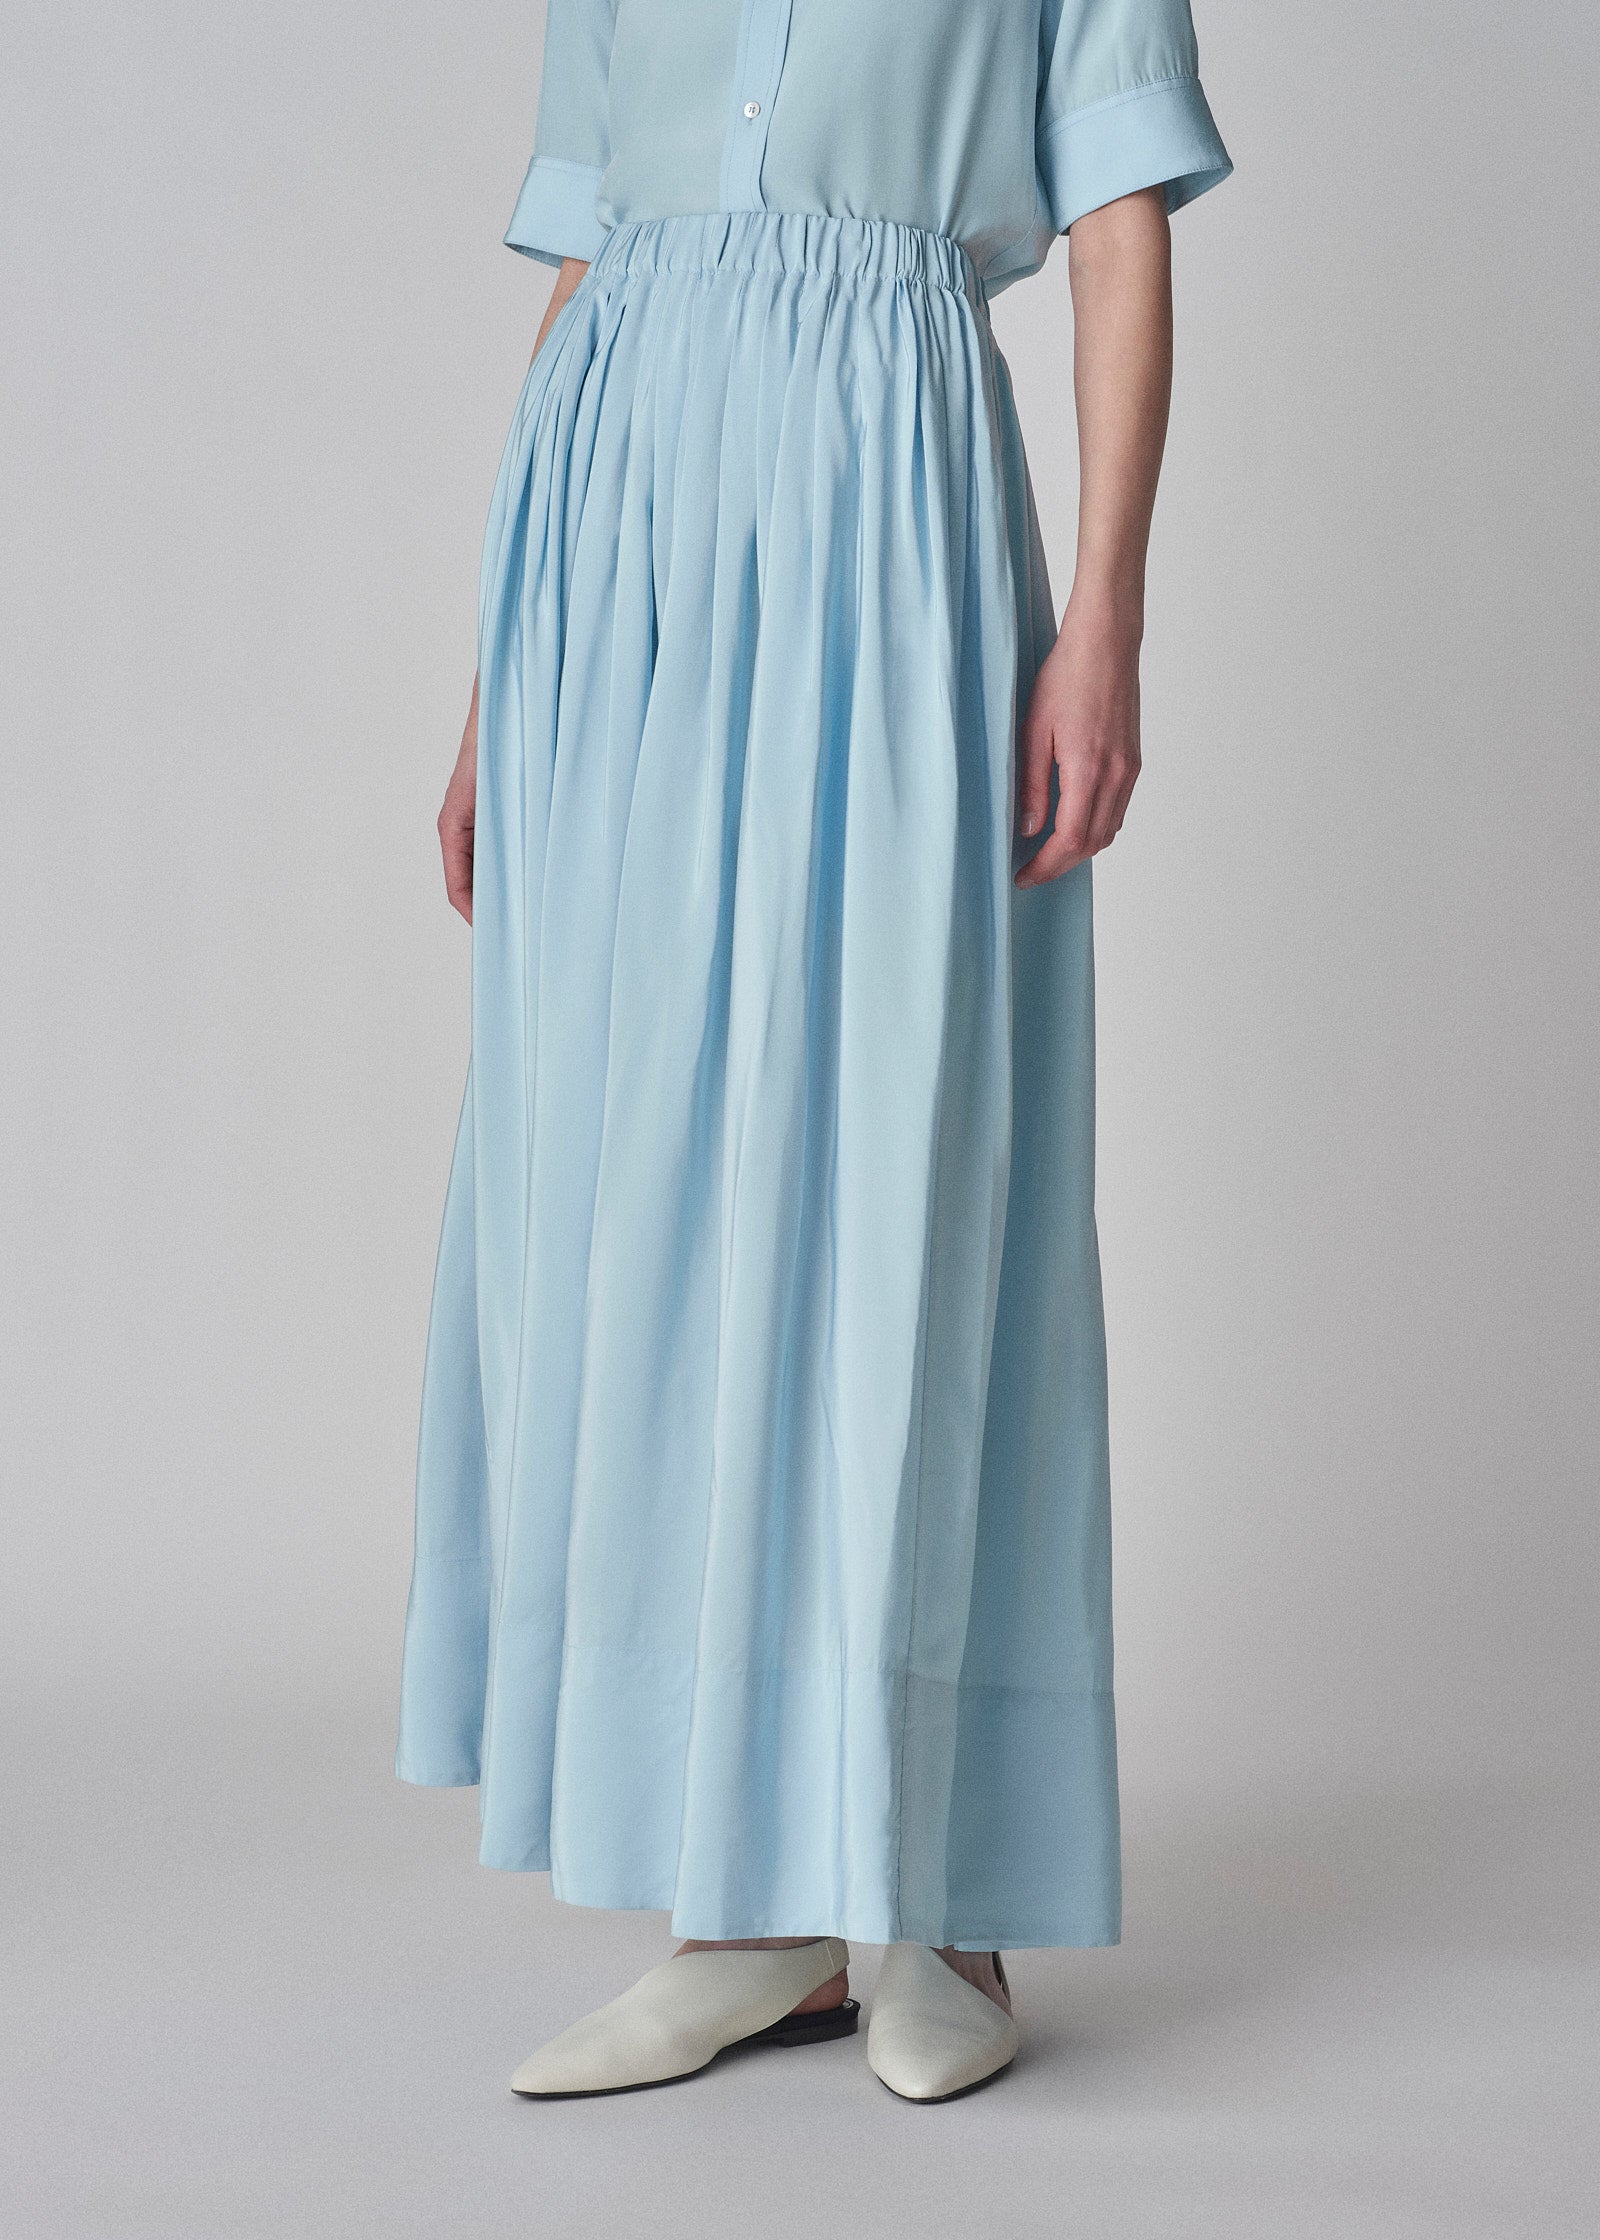 Gathered Skirt in Viscose Habotai - Blue - CO Collections